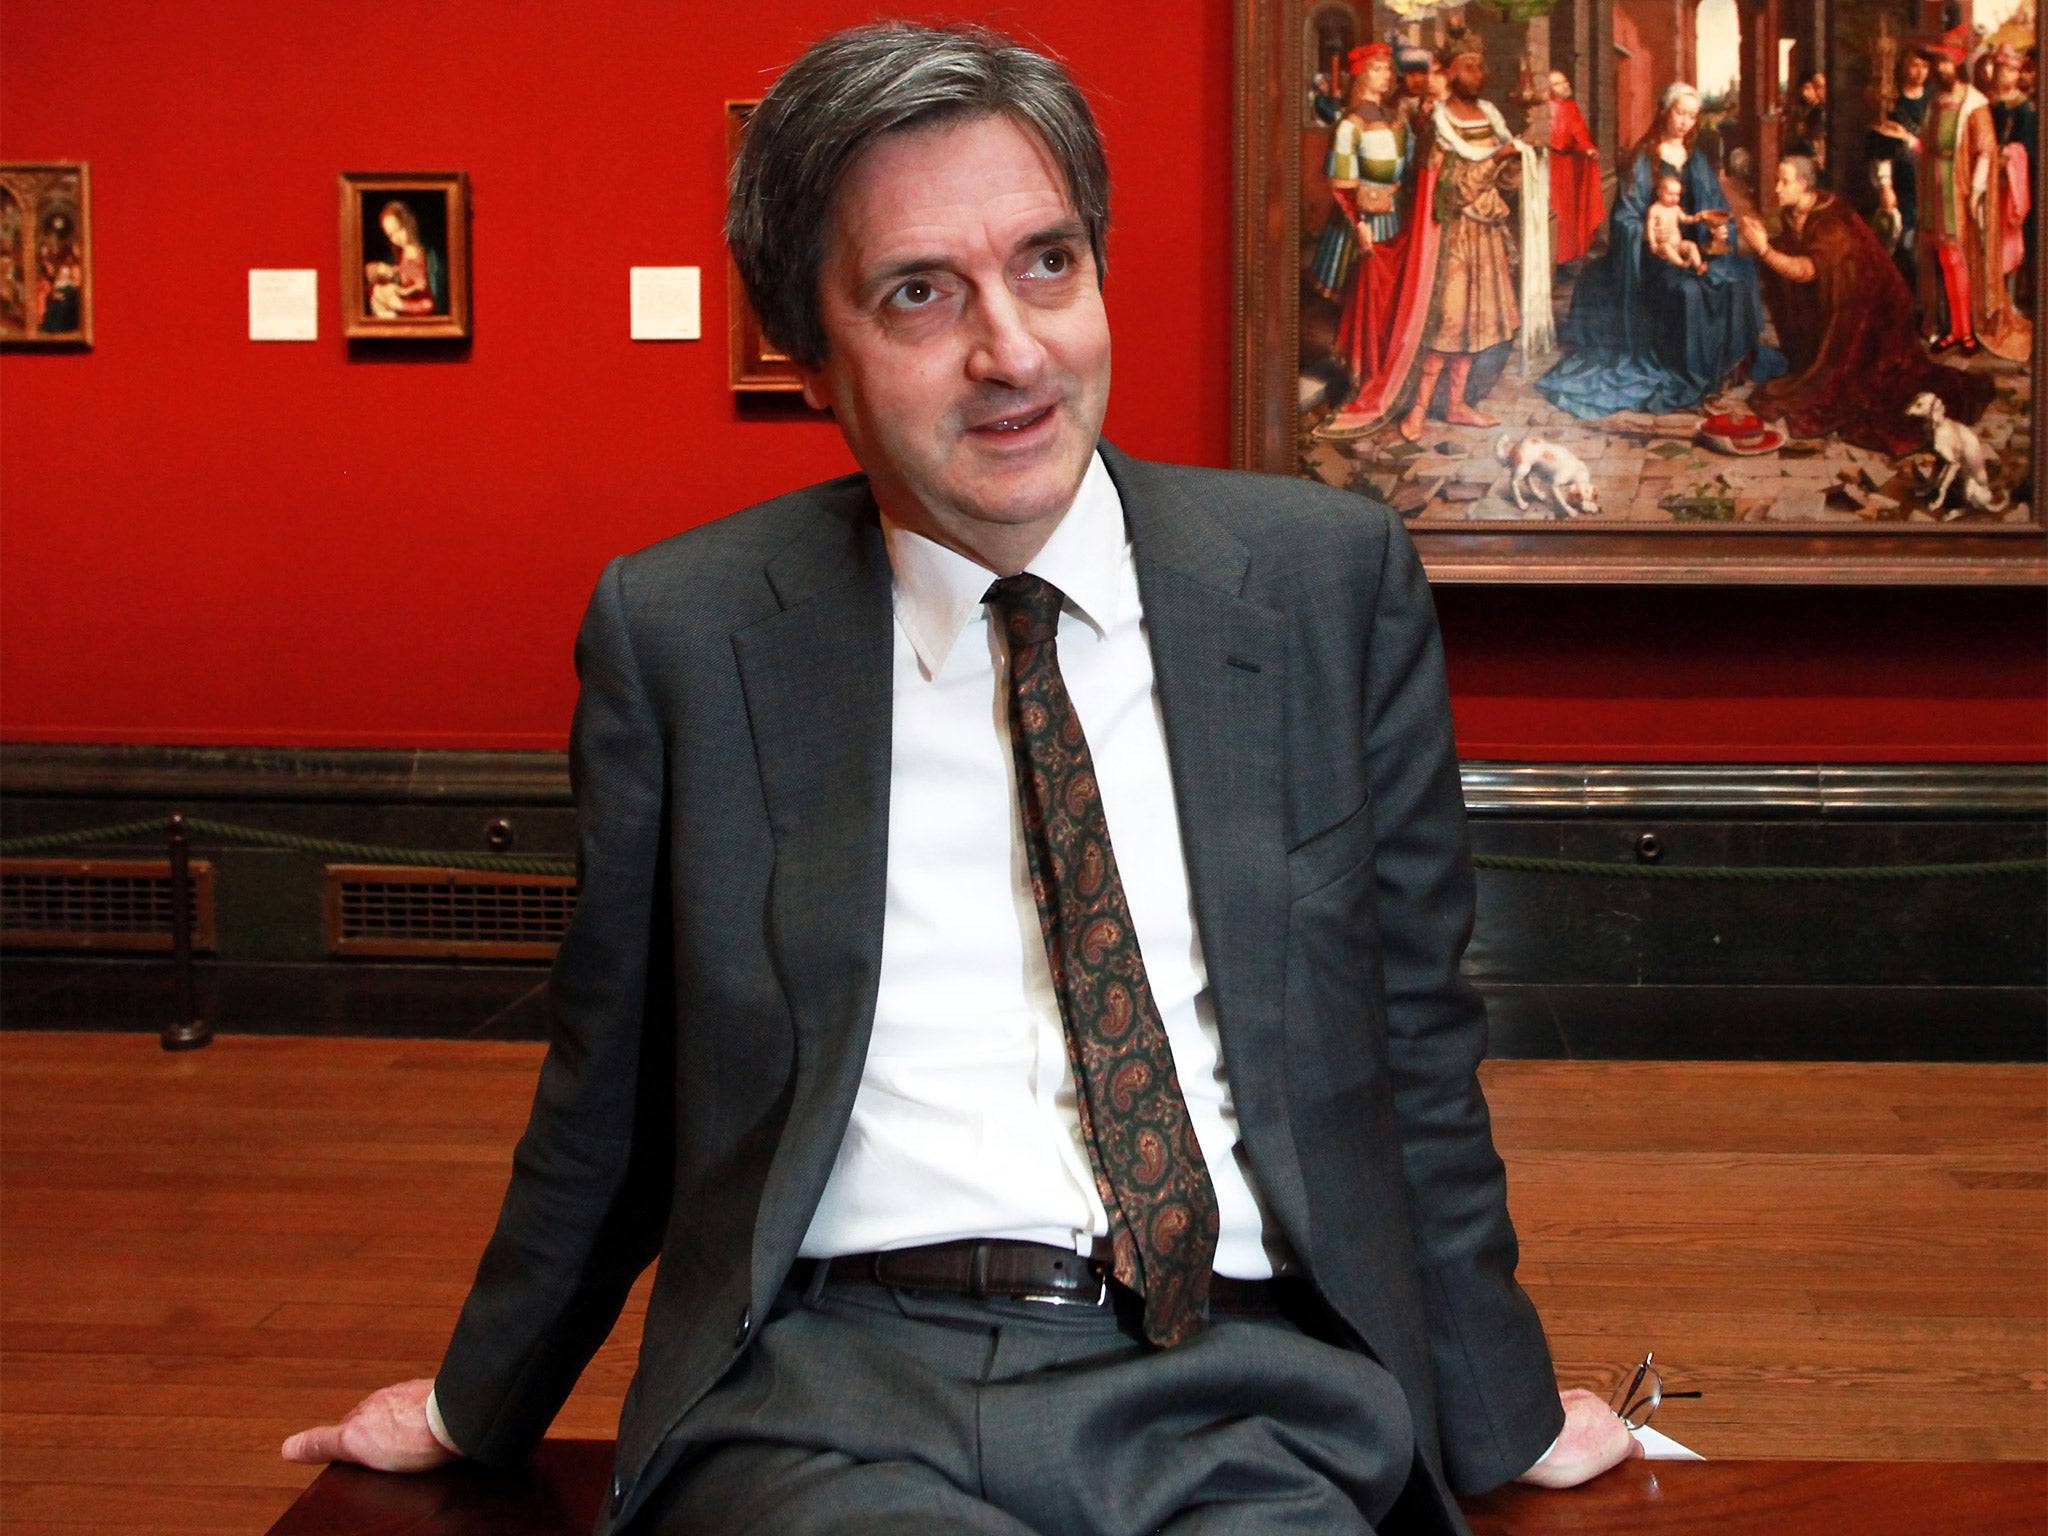 National Gallery director Nicholas Penny was heckled at a recent staff meeting